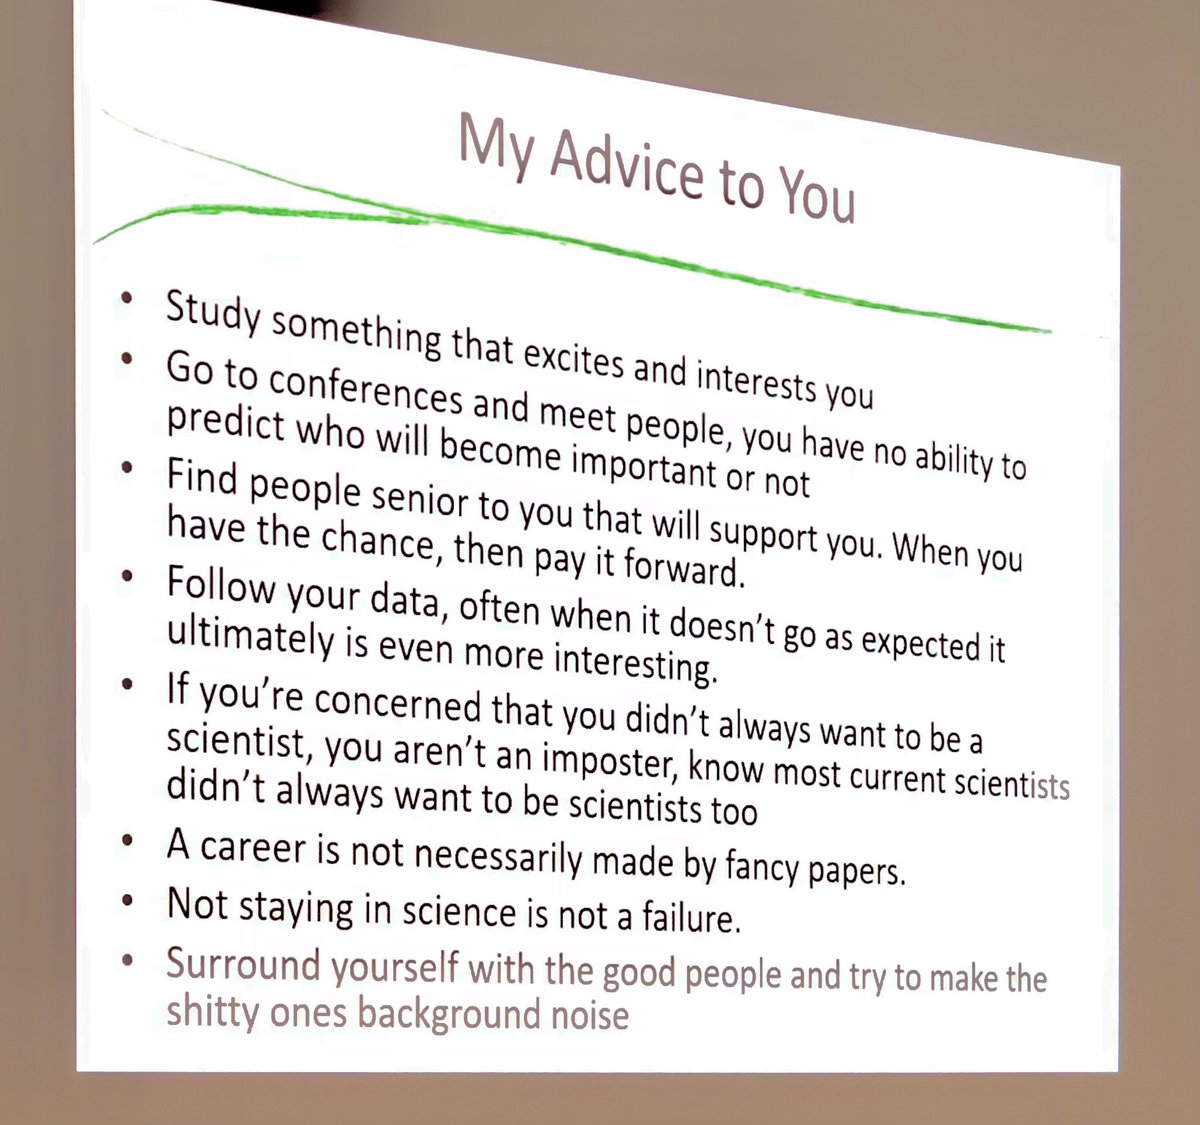 Advice for a young investigator @canna_brain style. The culmination of a fantastic journey through Matt’s career from wannabe novelist to translational neuroscientist.